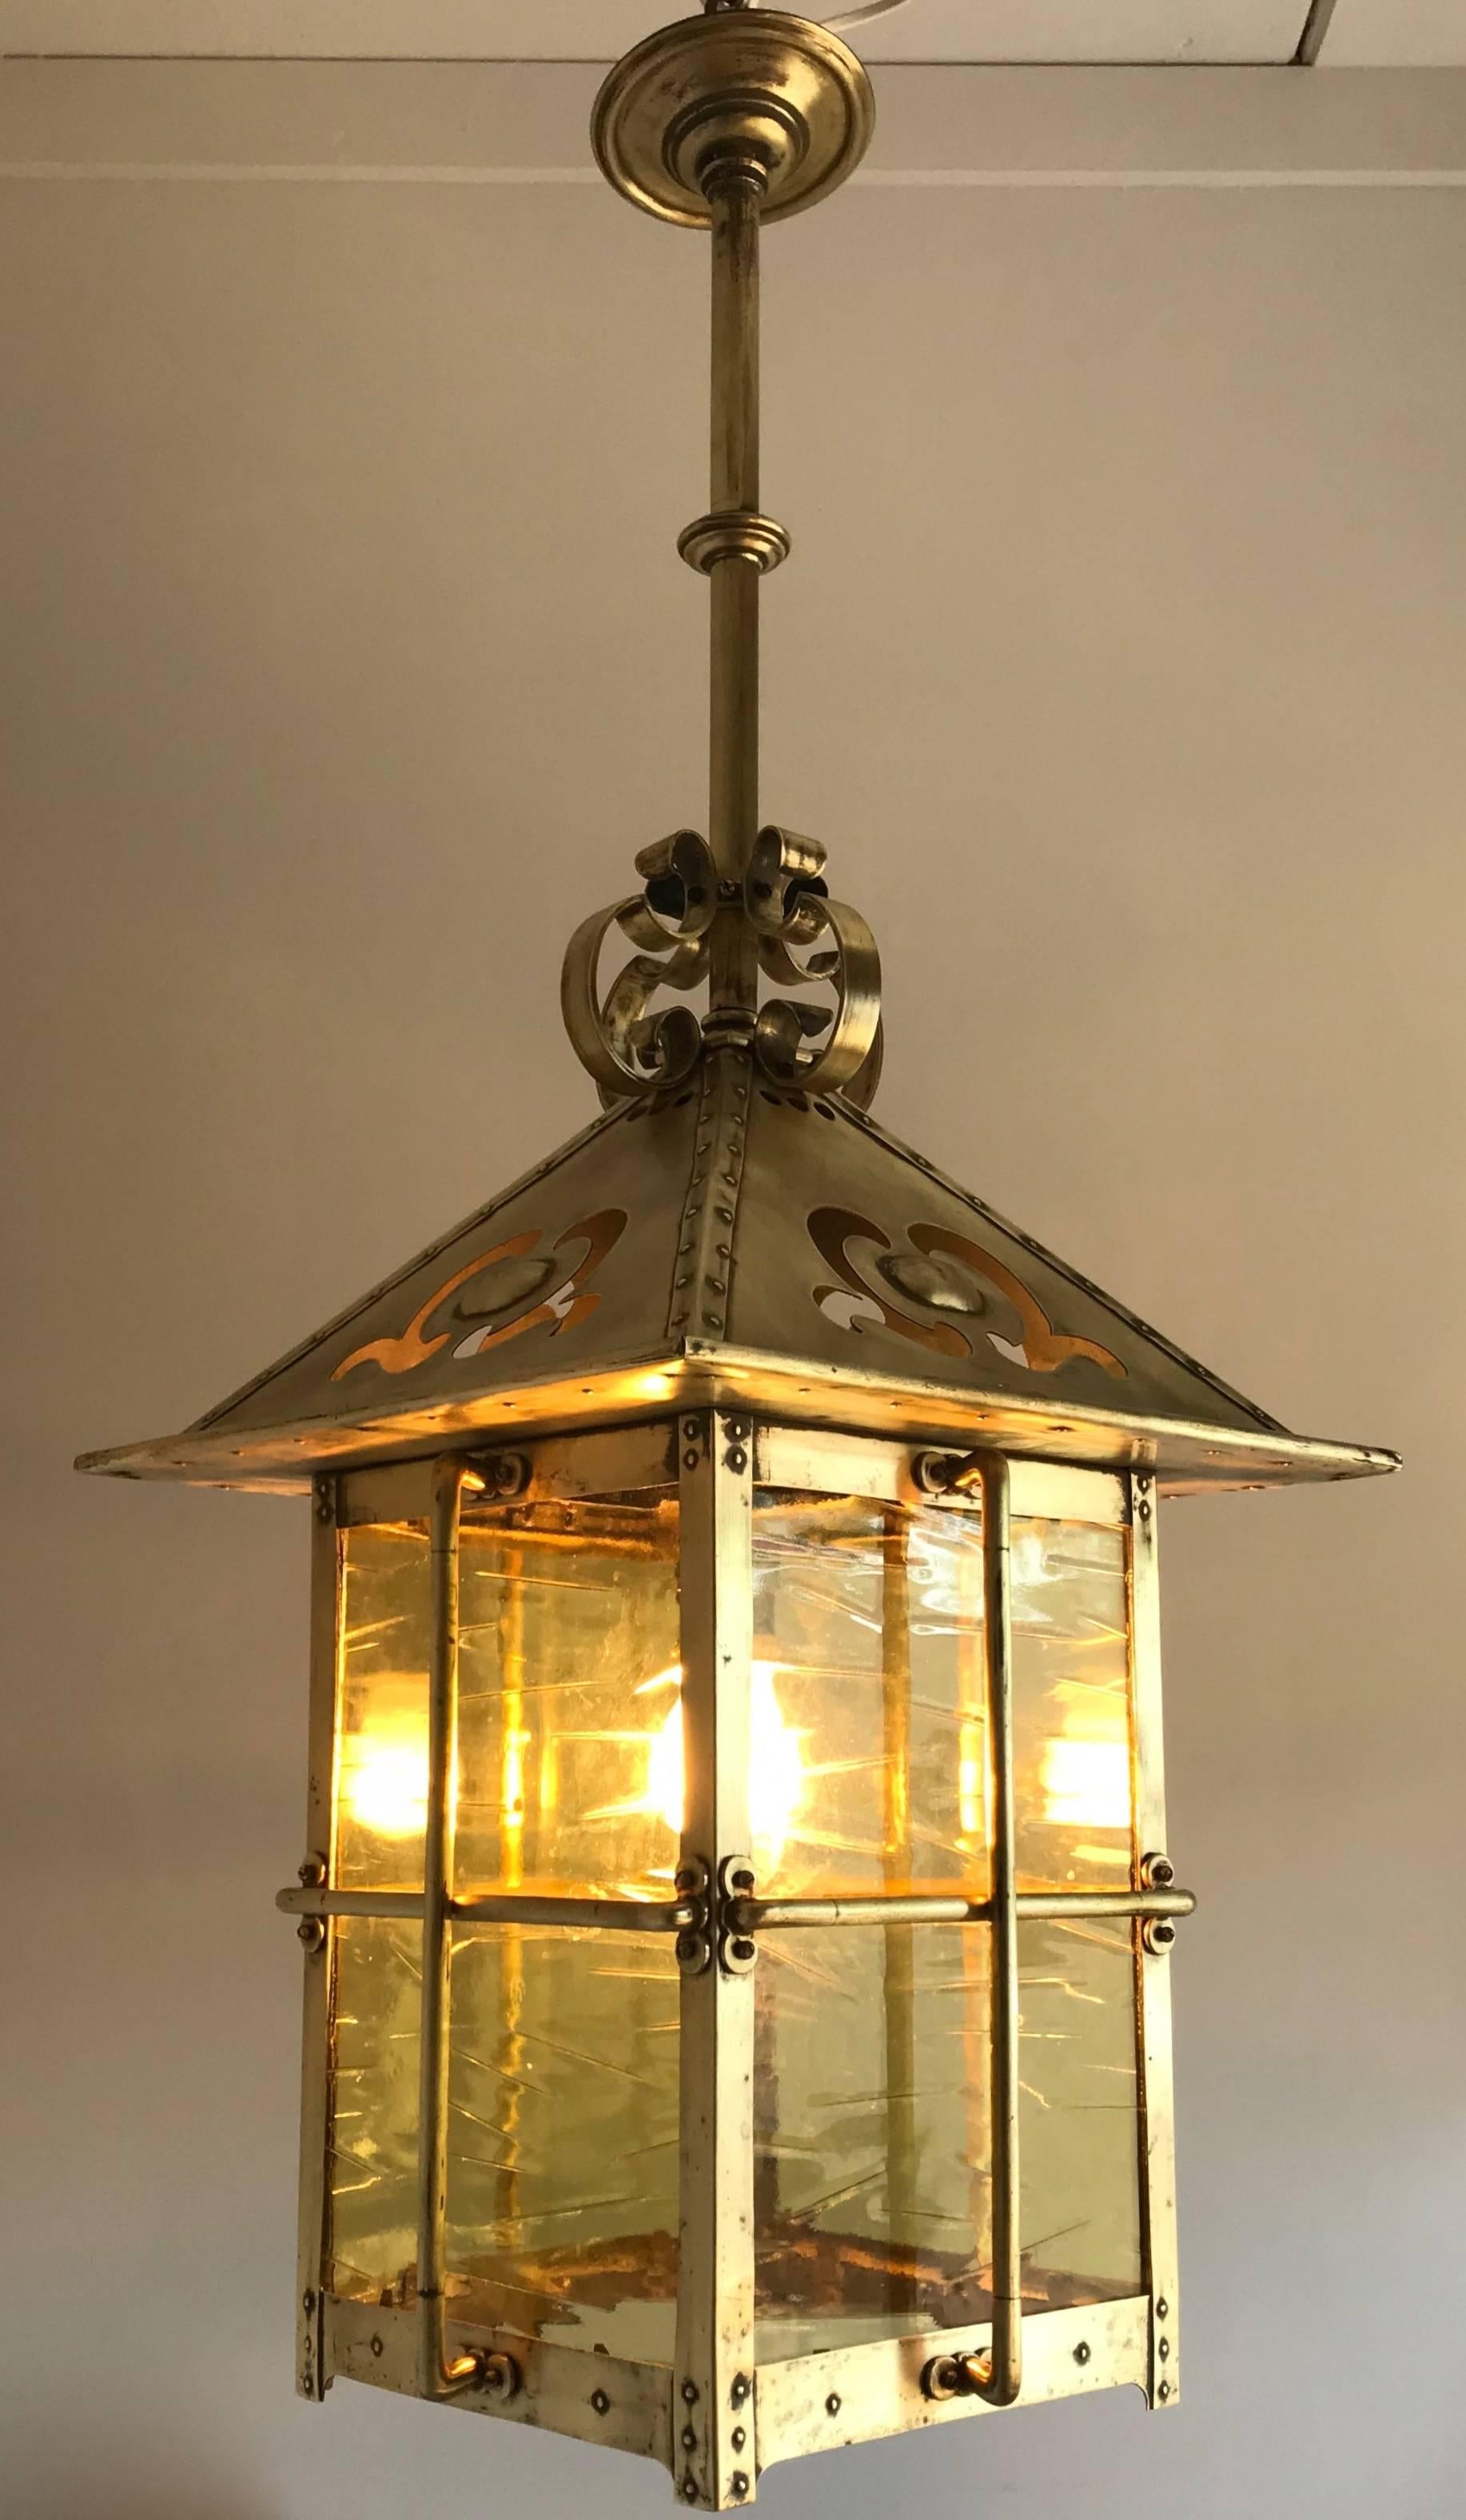 Top quality, hand-forged brass lantern.

This striking and great design pendant in HB Berlage style is in excellent and good working condition. If you are a lover of the Jugendstil and Art Nouveau period and you already have a space in mind for this